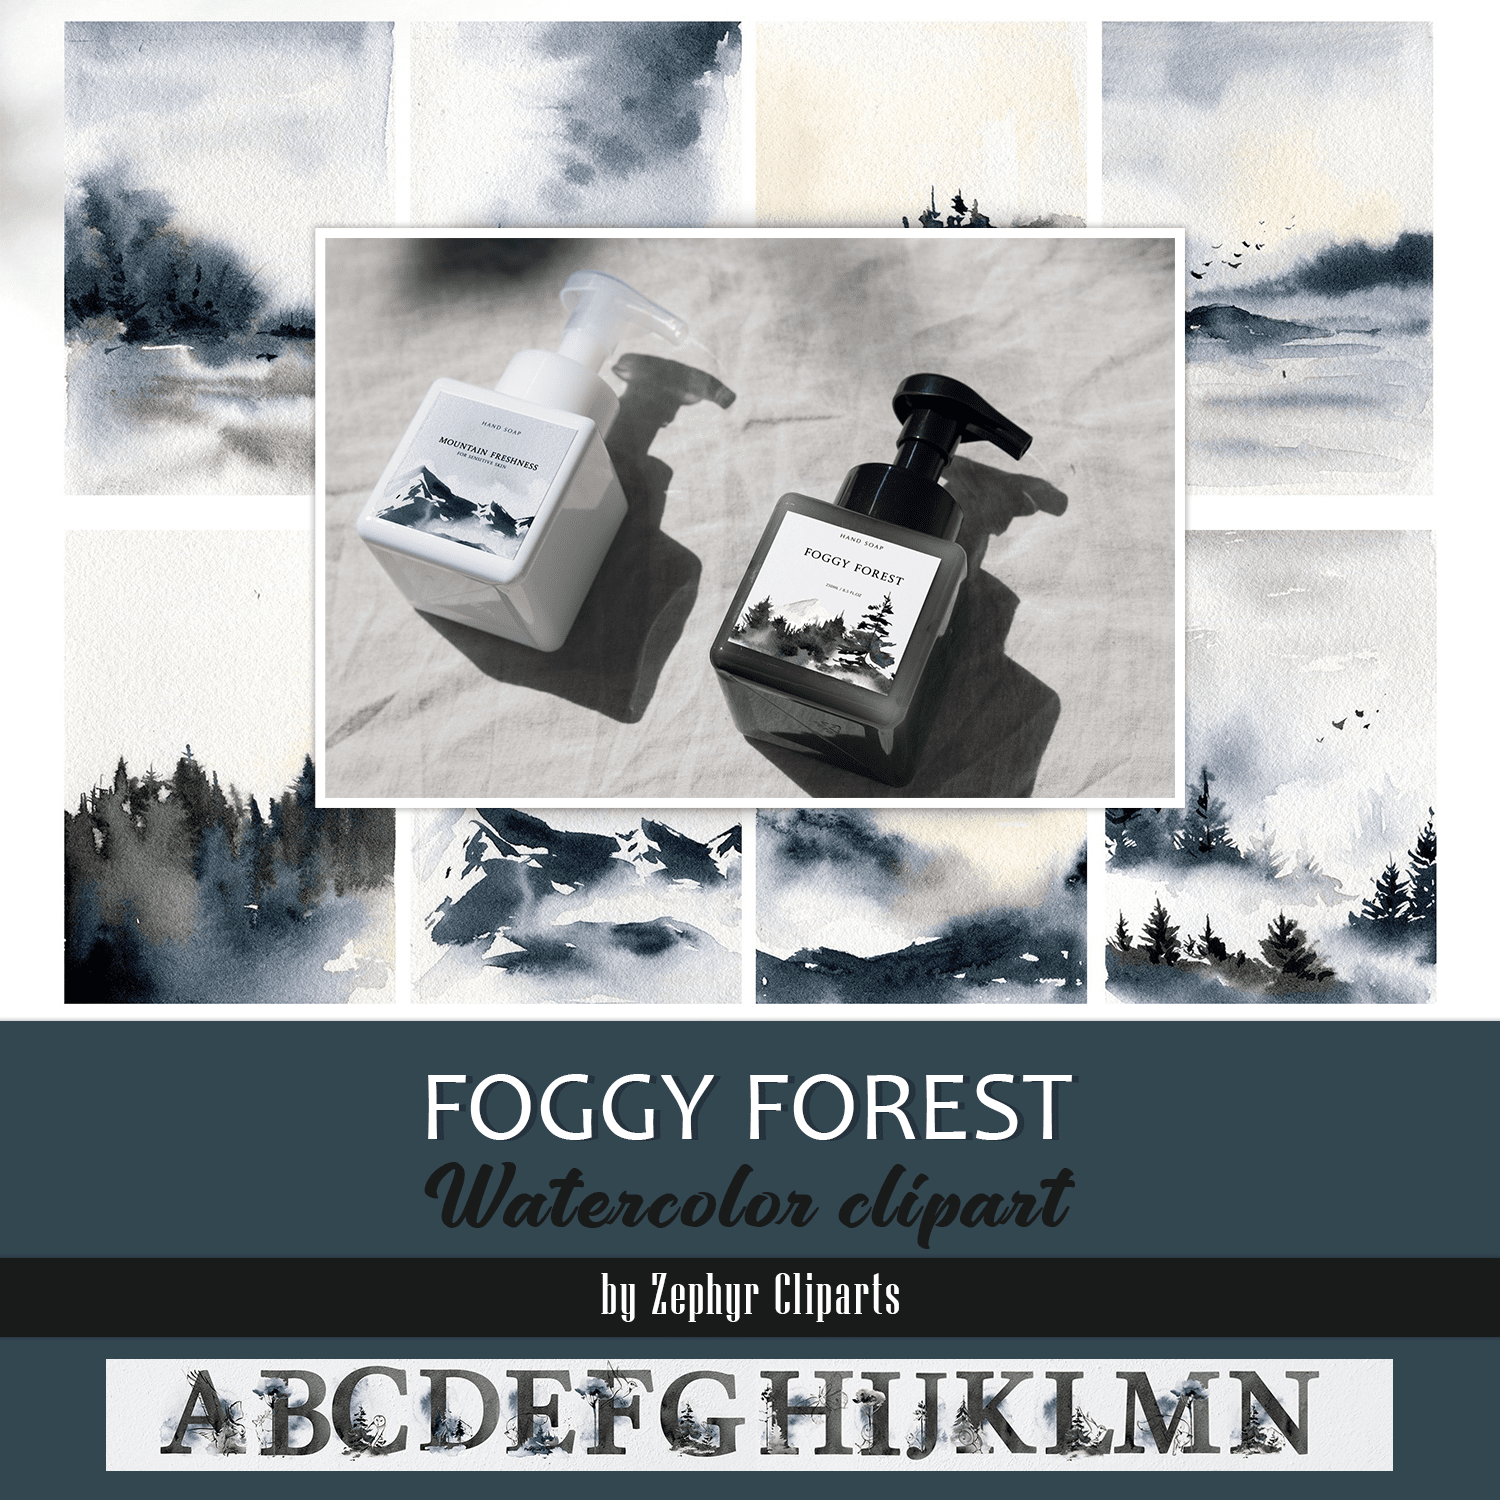 Foggy forest watercolor clipart created by Zephyr Cliparts.